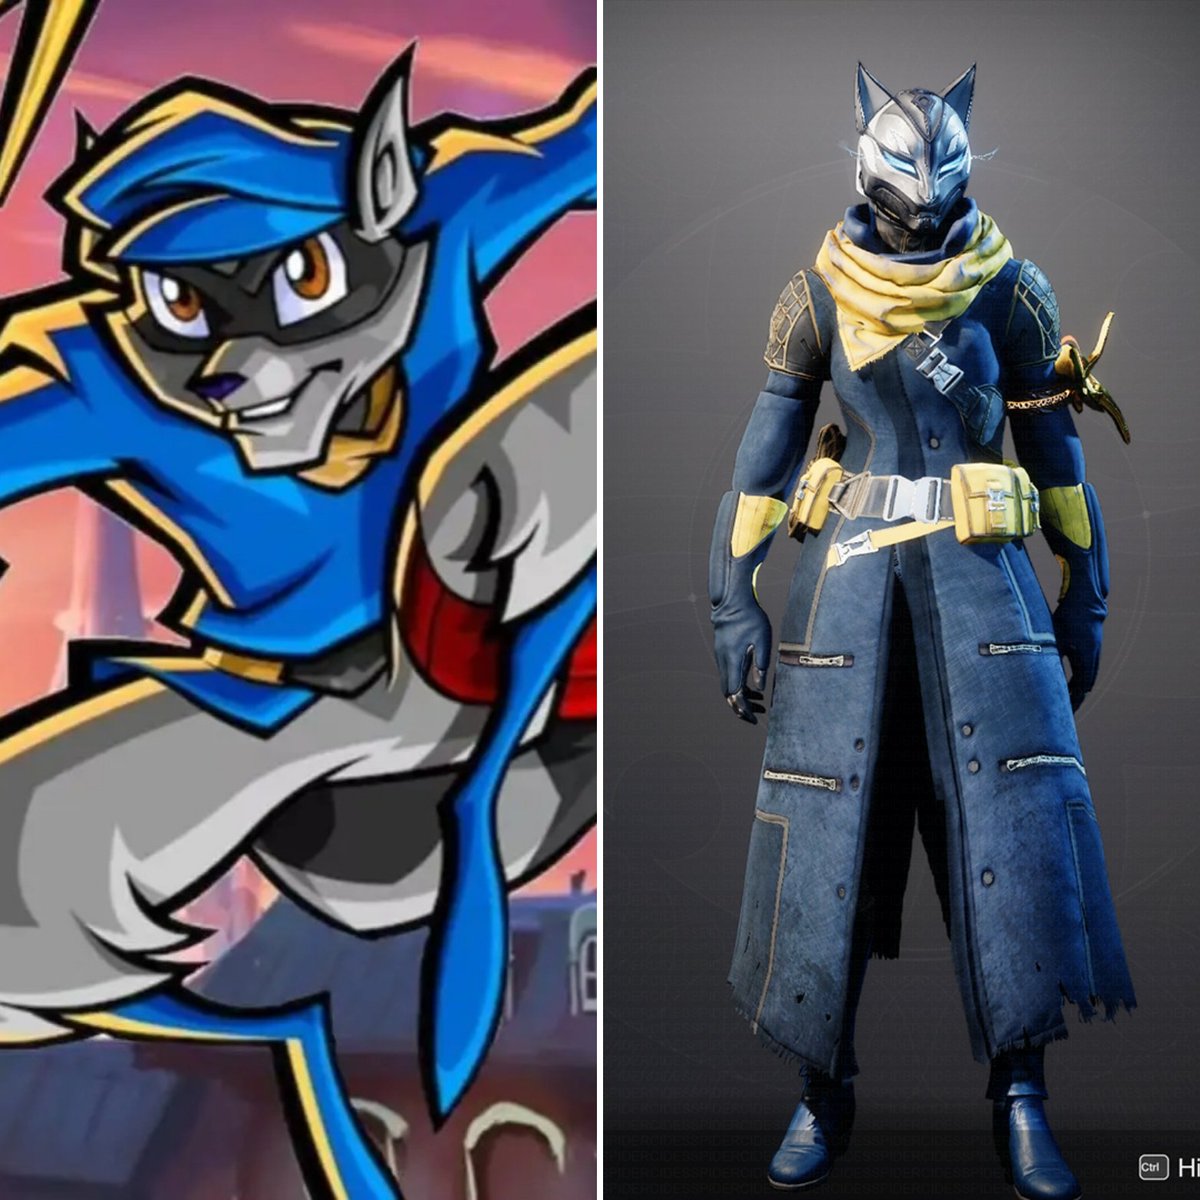 Sly Cooper. #Destiny2 #Bungie #Gaming #ThreadsOfLight #DestinyFashion

Not an easy transmog but someone had requested it and I figured why not. 🫡

Check out the transmog details below in the thread. 👇